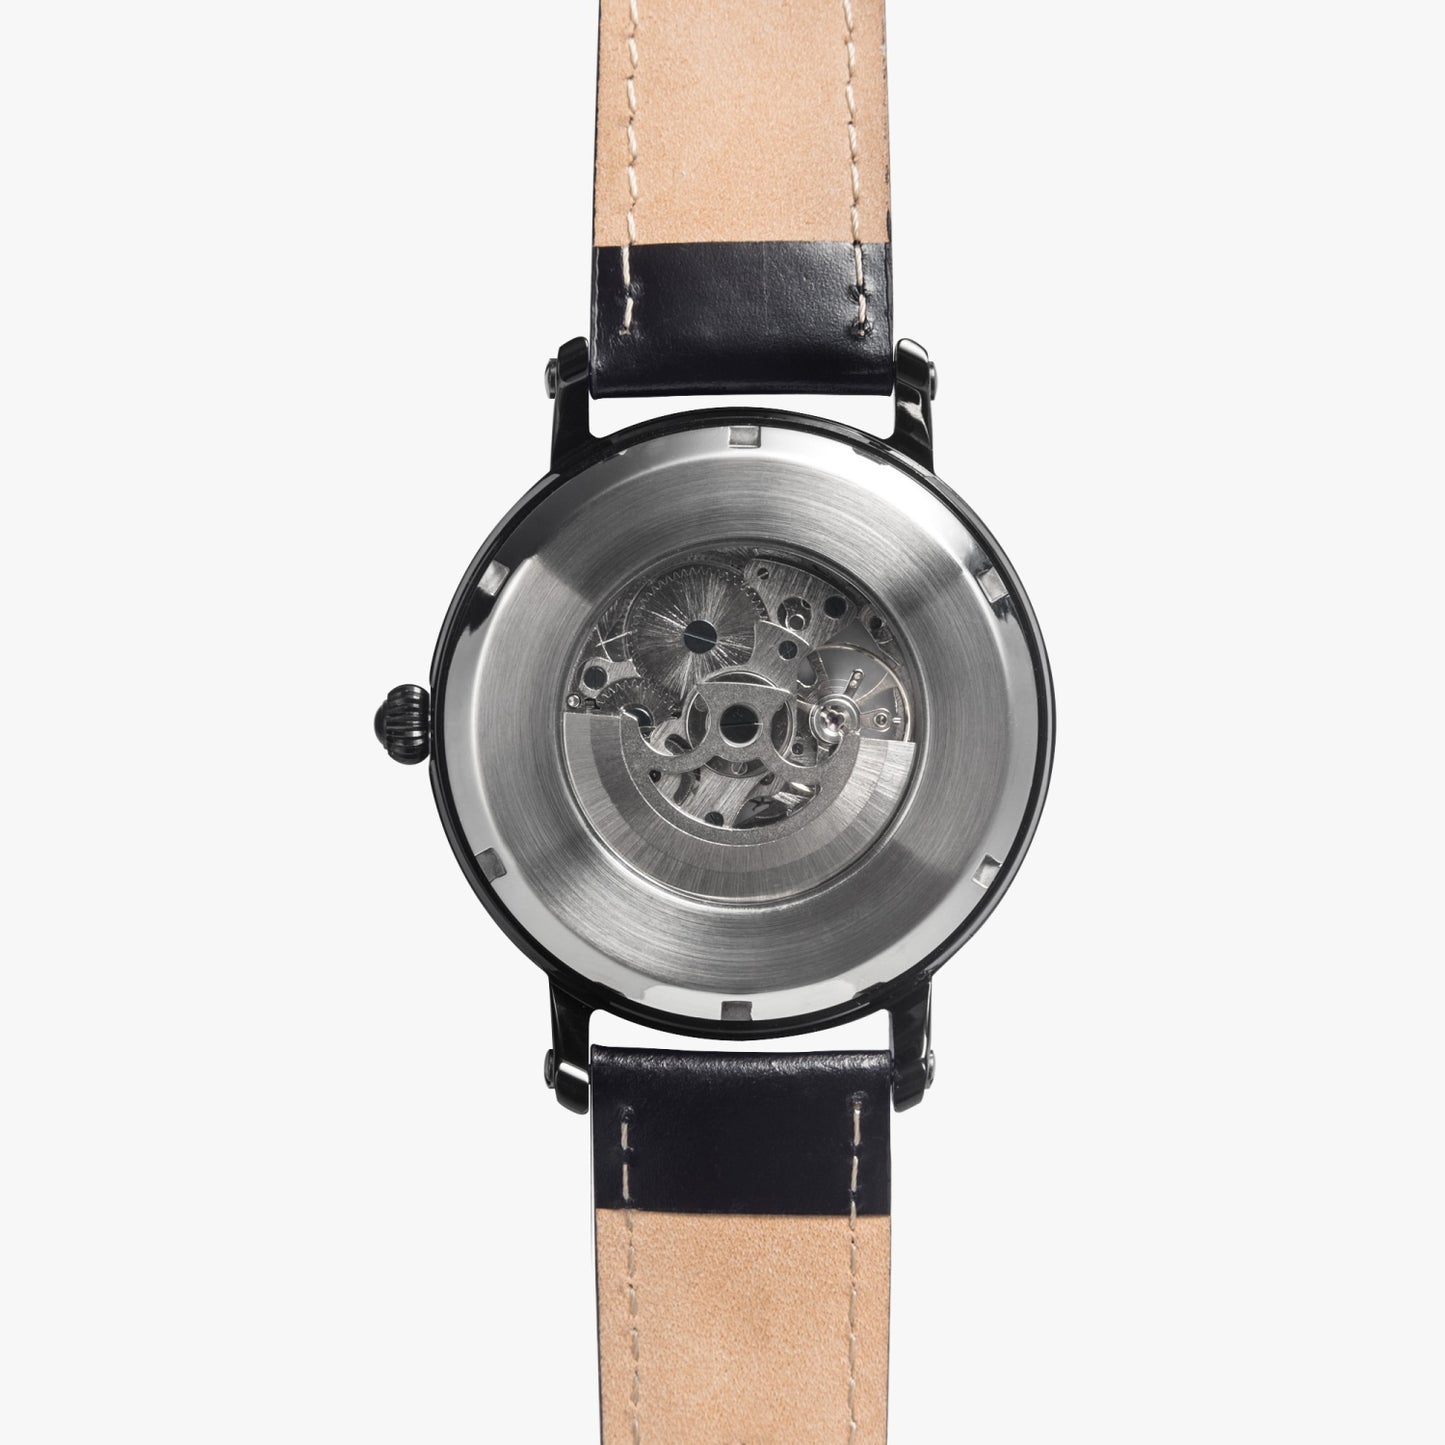 "Kaomond" automatic leather watch (with indicators)